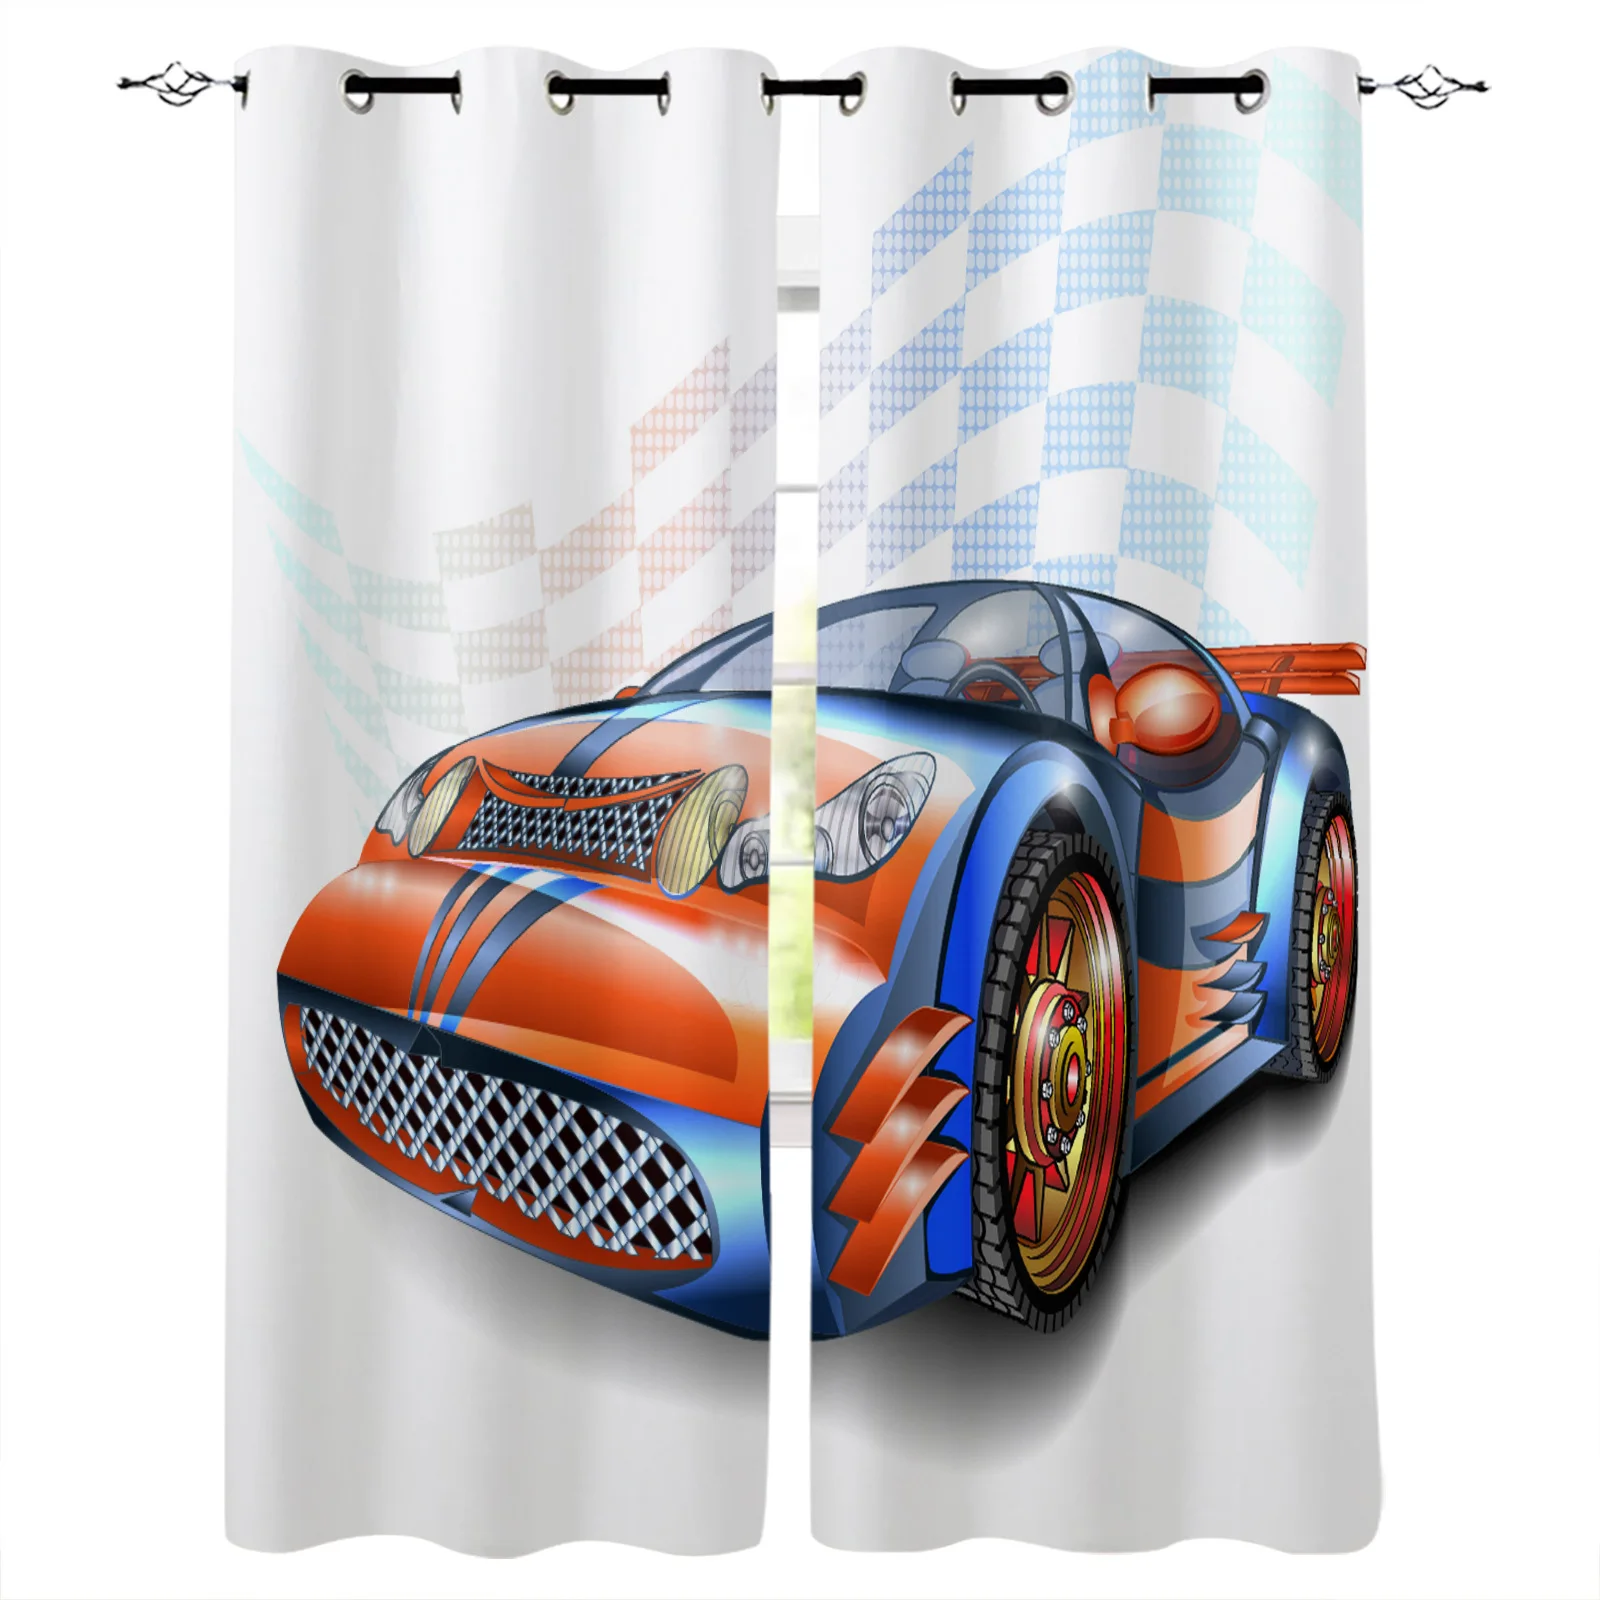 Car Orange Race Speed Race Racing Car Curtains In The Bedroom Living Room Hall for Home Kitchen Window Treatments Drapes